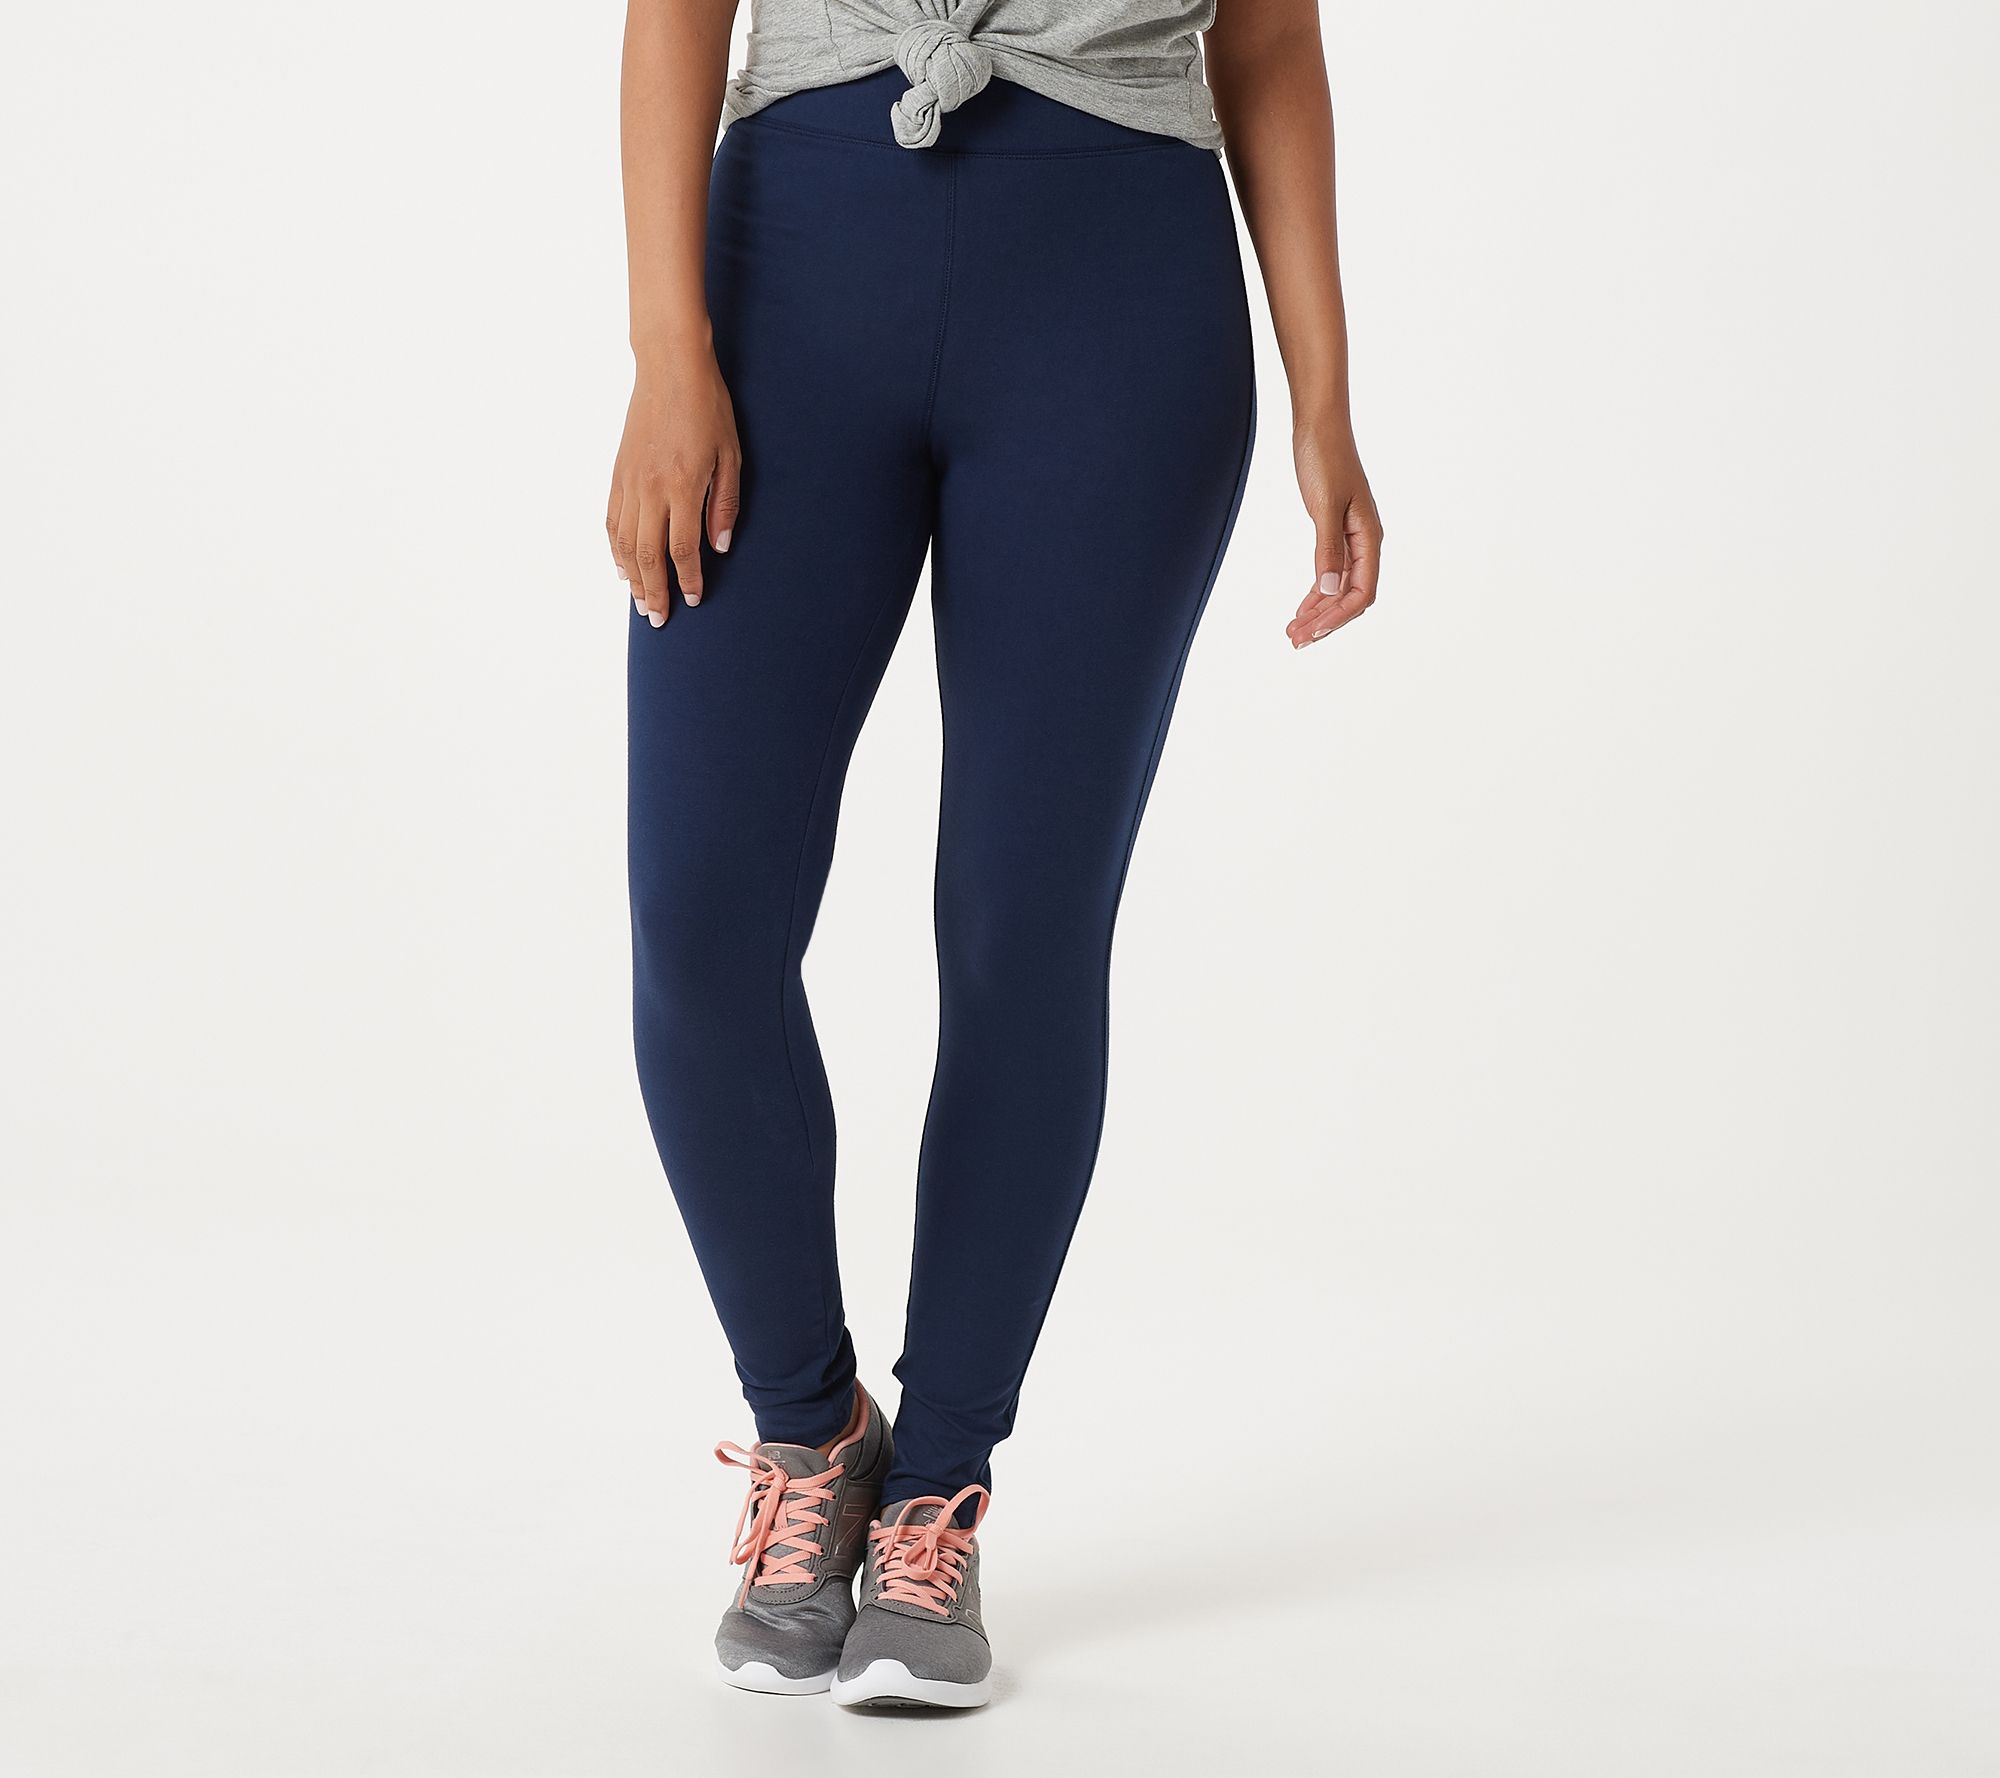 Denim & Co. Active Tall Duo Stretch Printed Leggings 